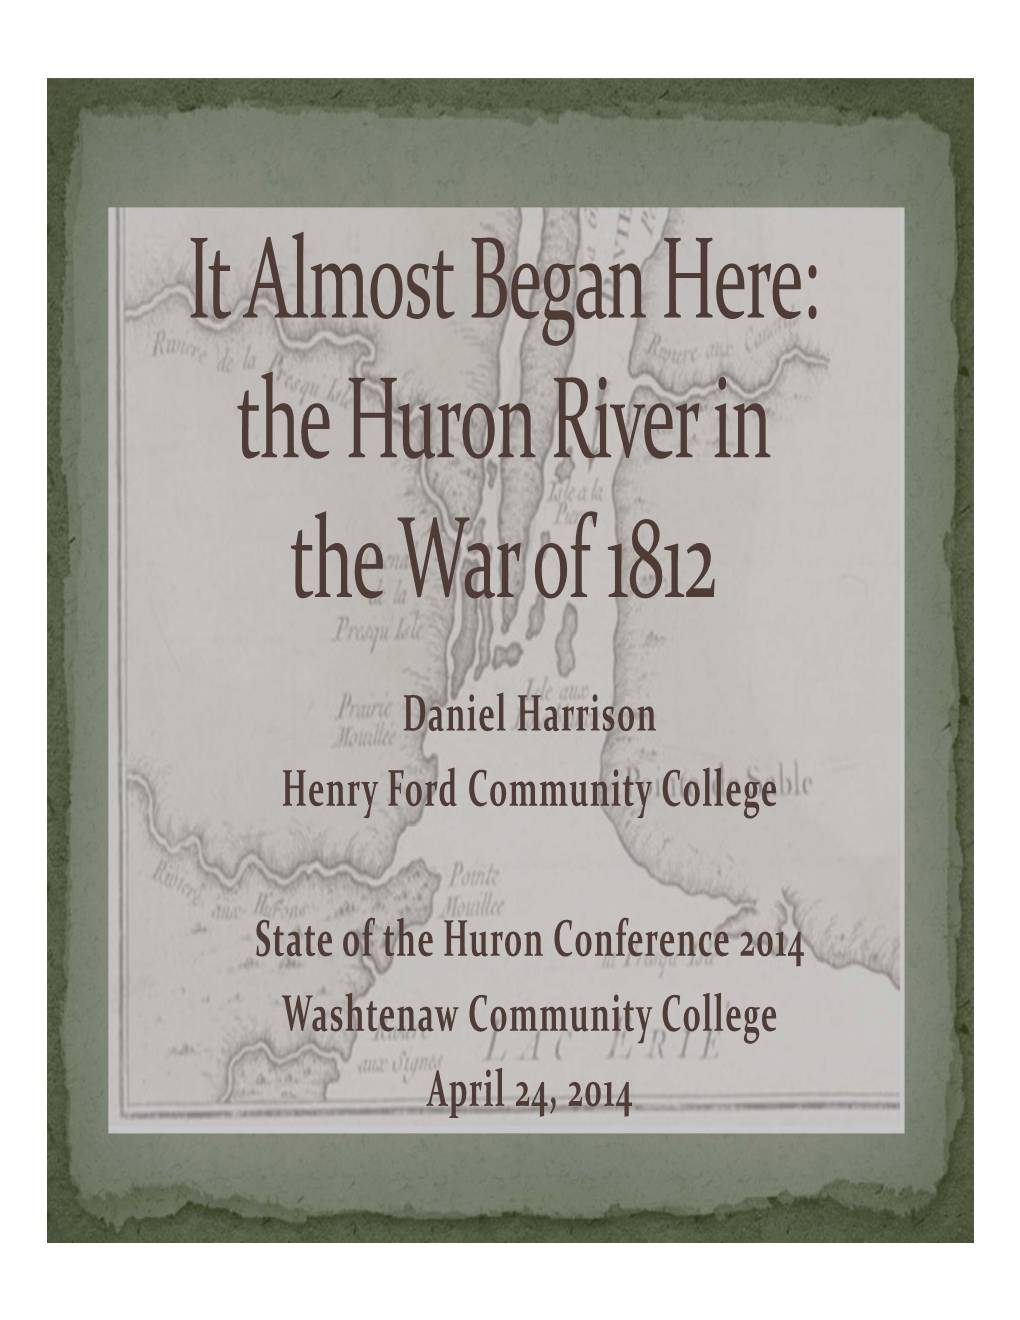 It Almost Began Here: the Huron River in the War of 1812